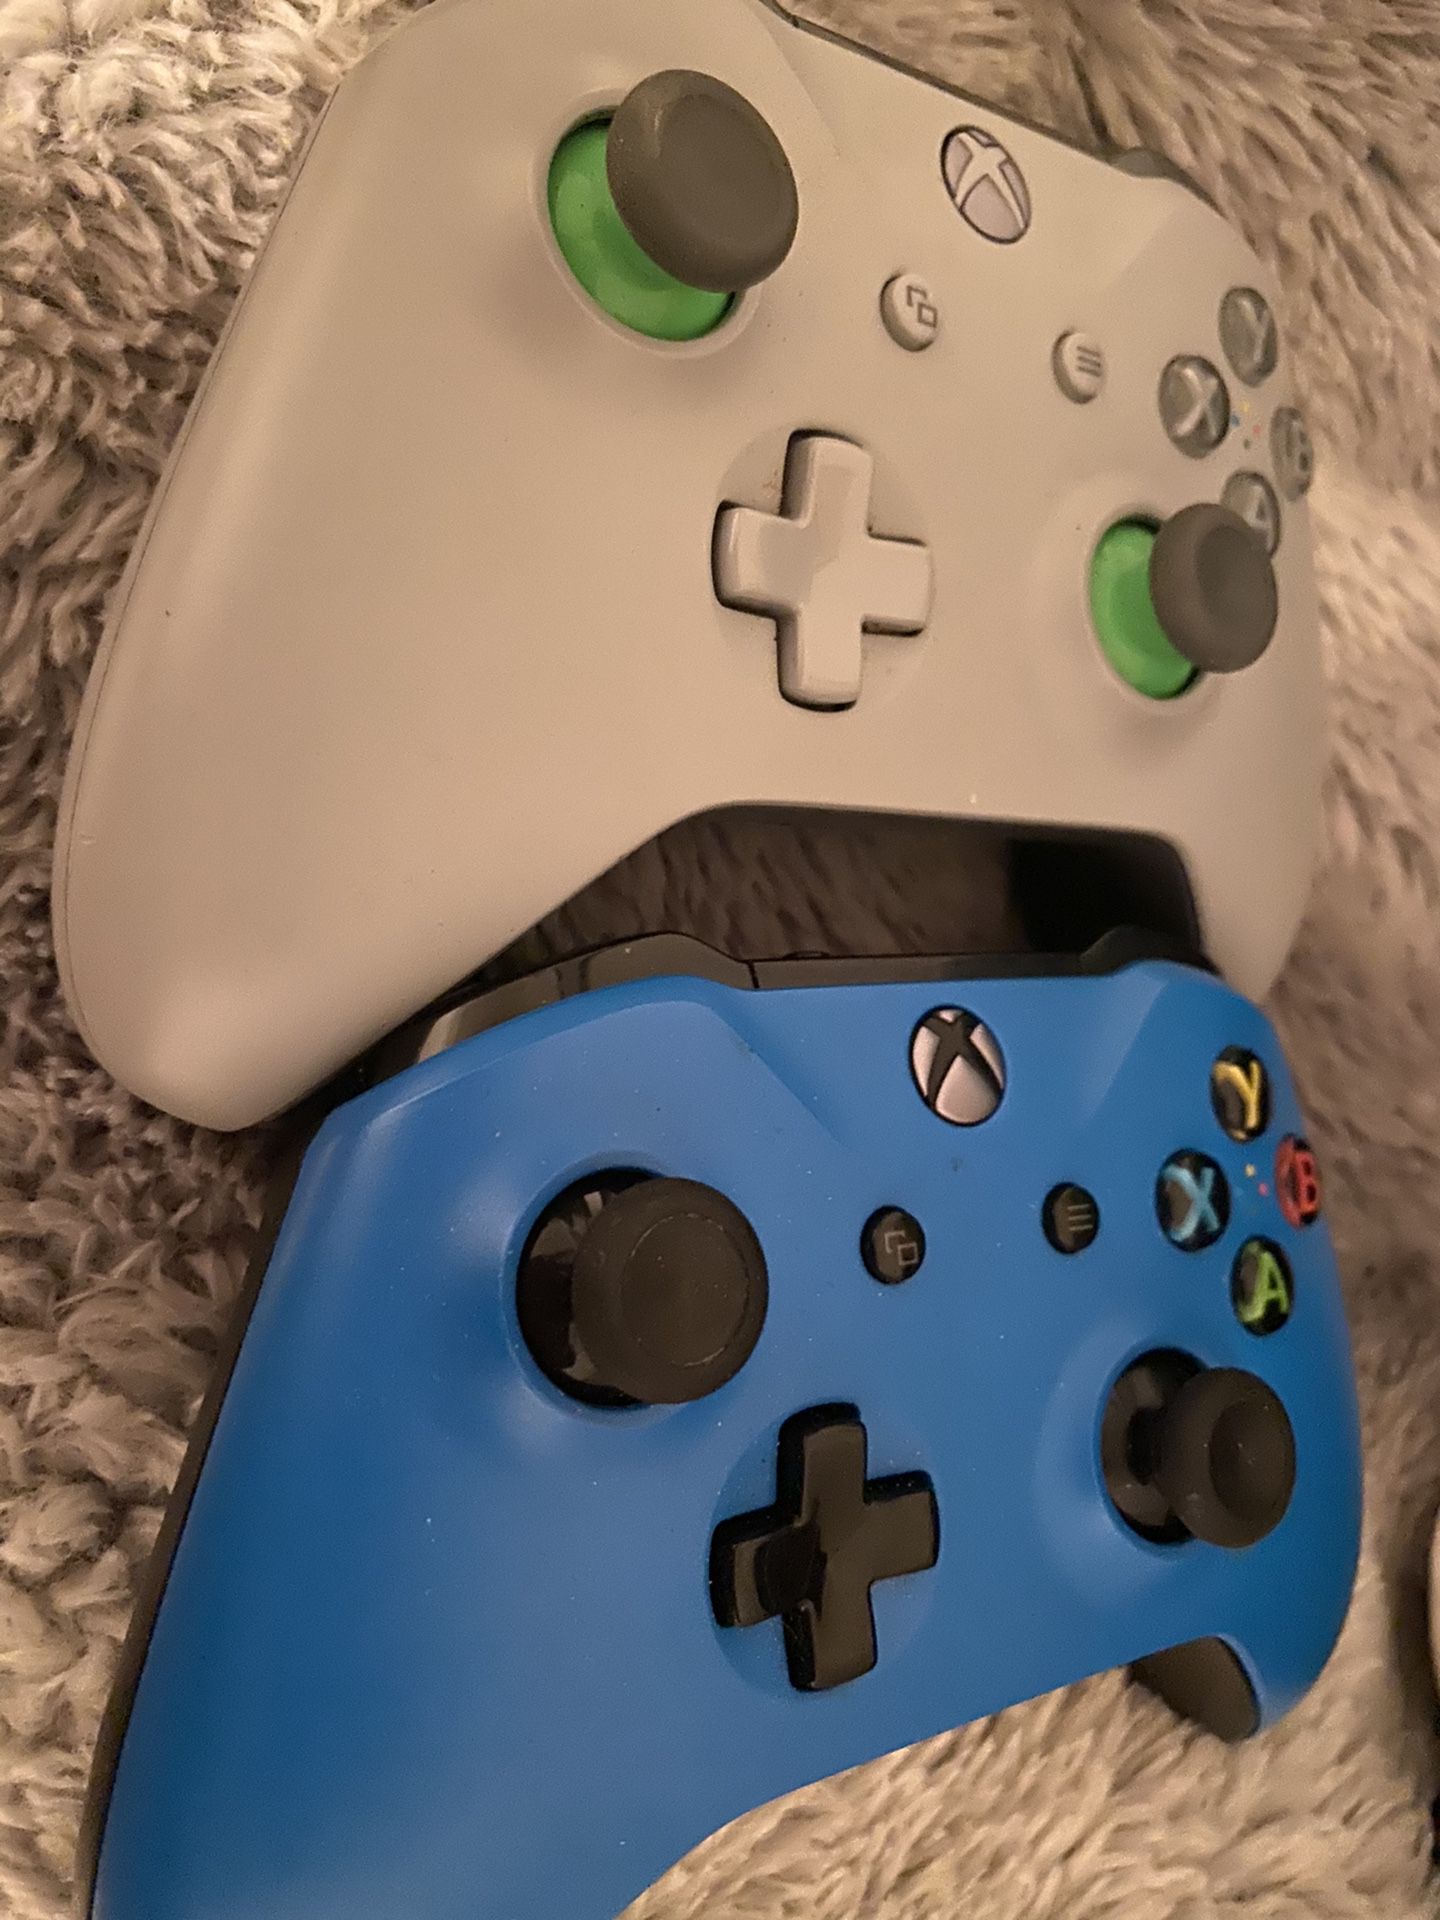 Two Xbox One Controllers - & $60 for both OBO